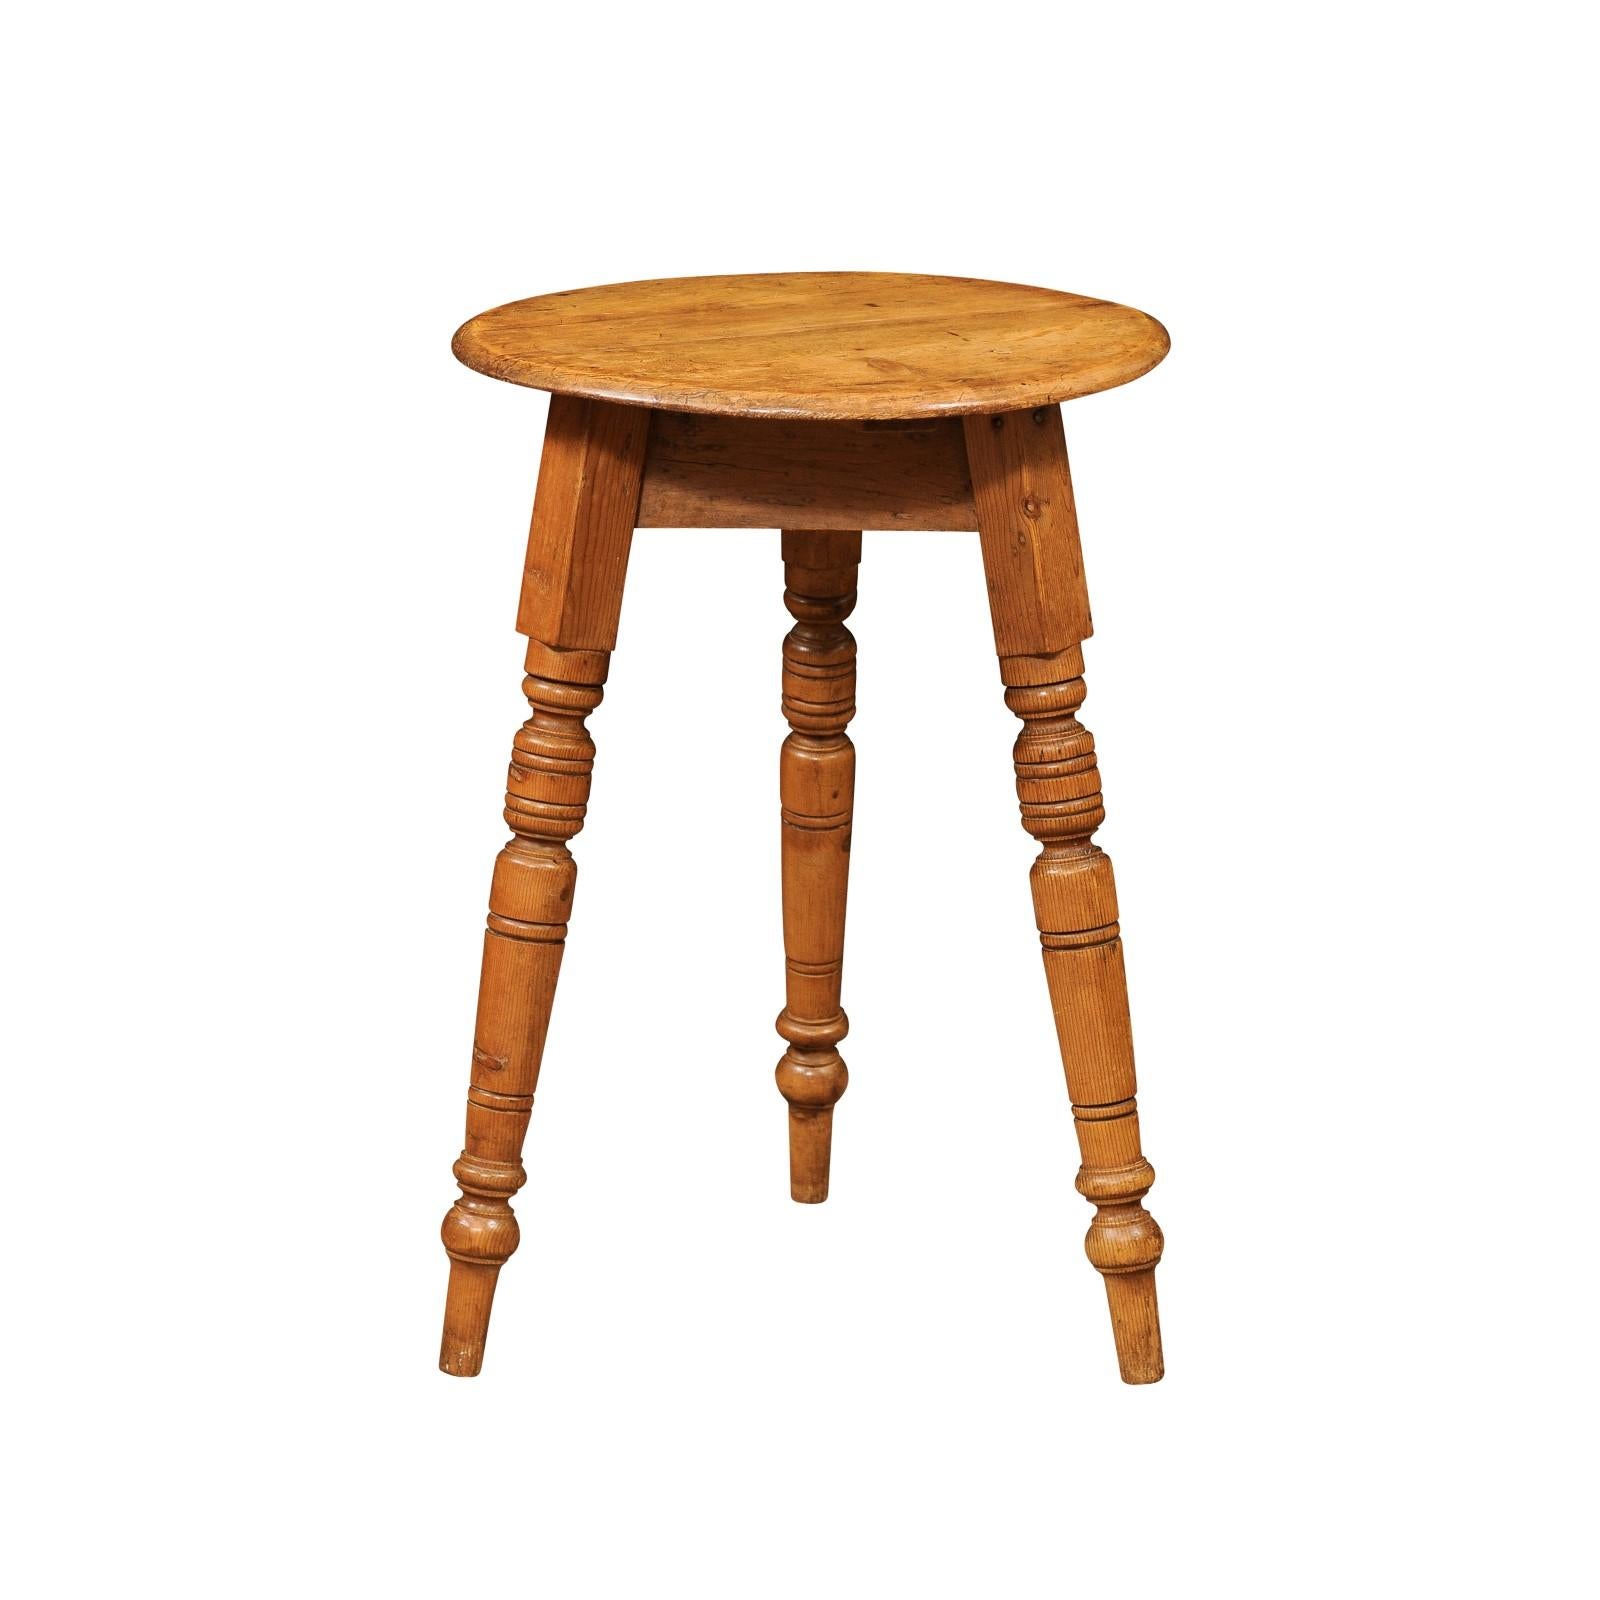  Late 19th Century English Pine Cricket Table with Turned Legs In Good Condition For Sale In Atlanta, GA